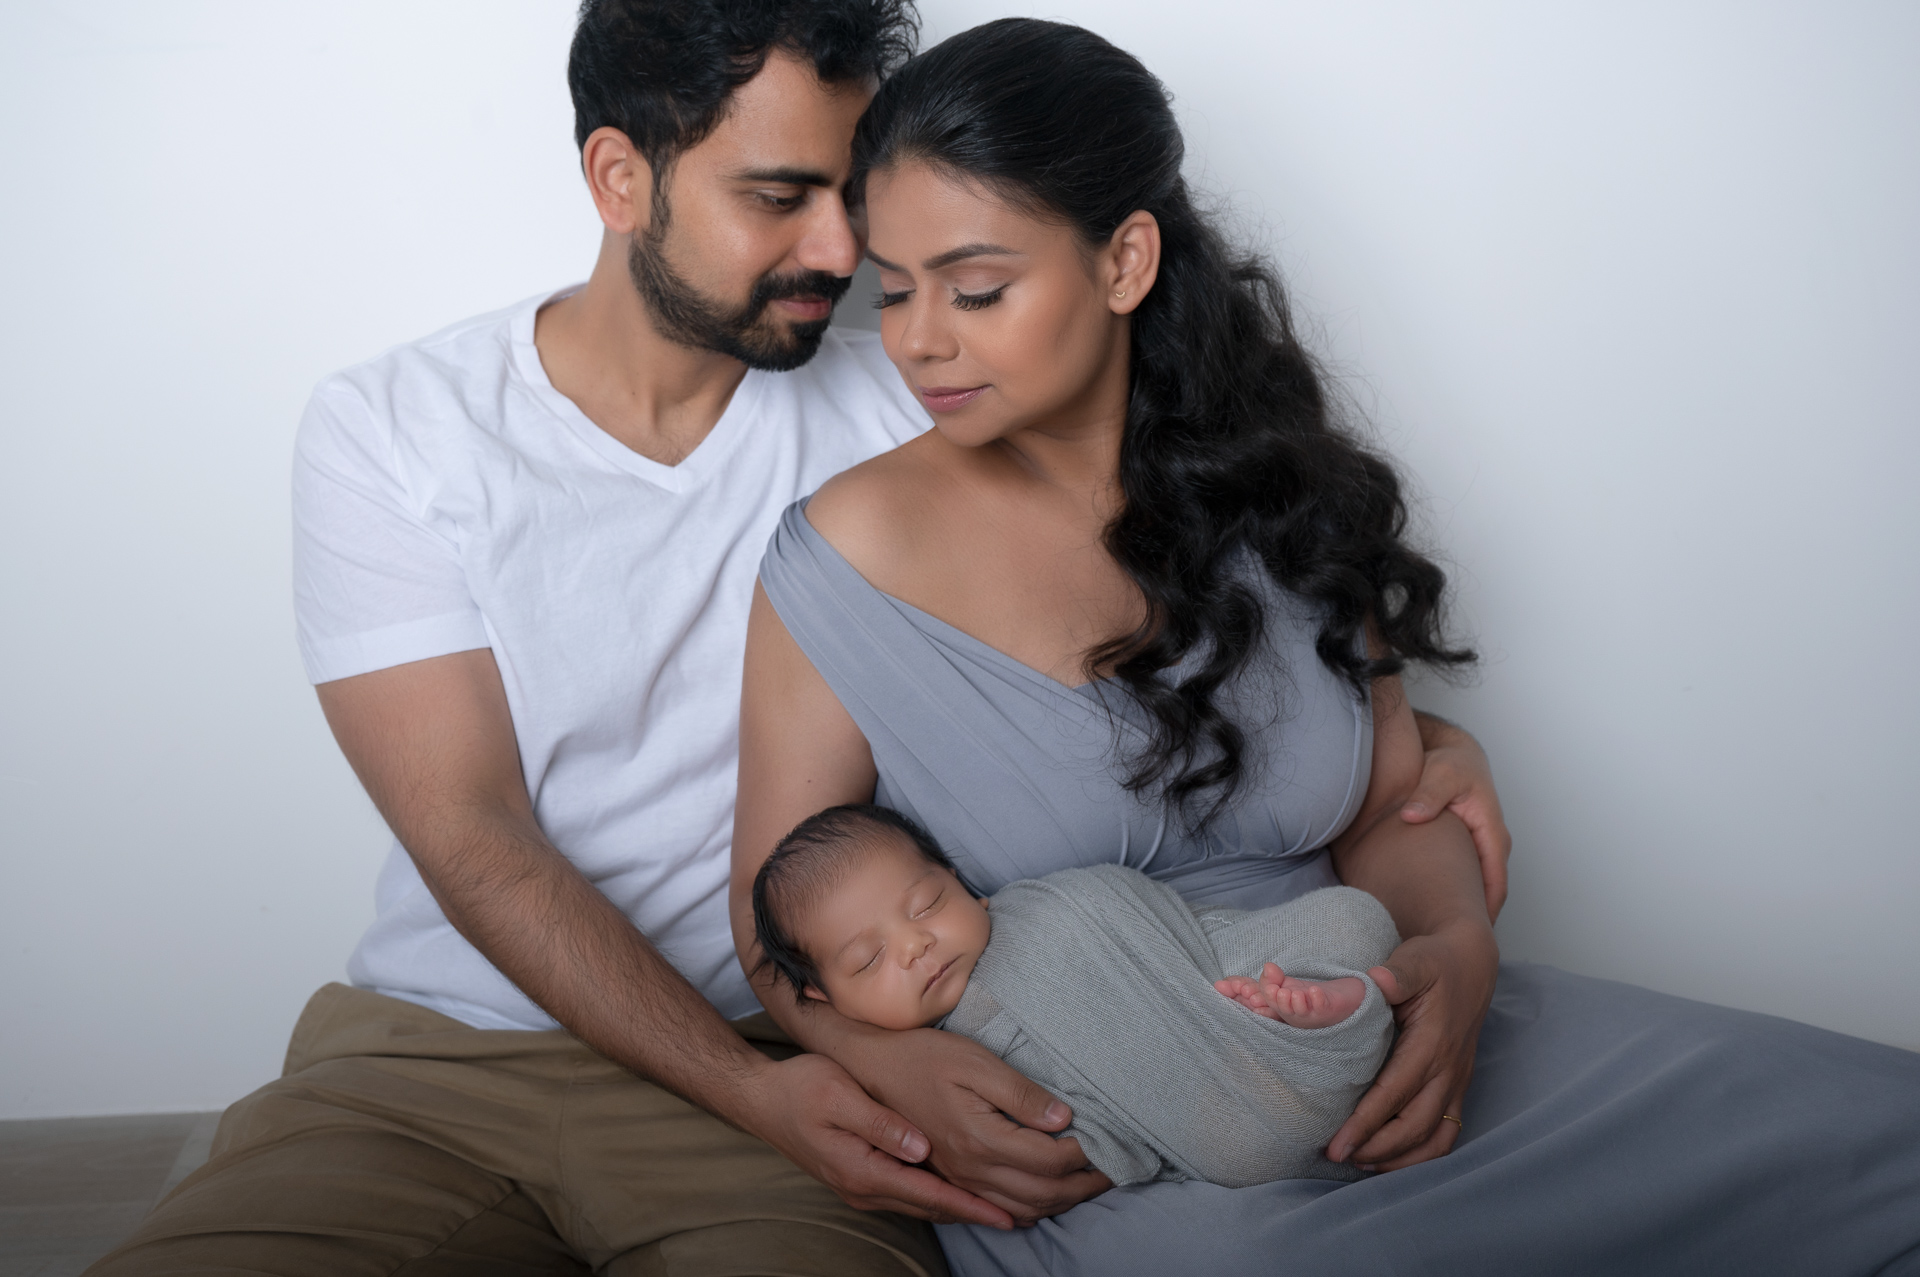 mom and dad holding their newborn son sitting and look away from the camera, white backdrop